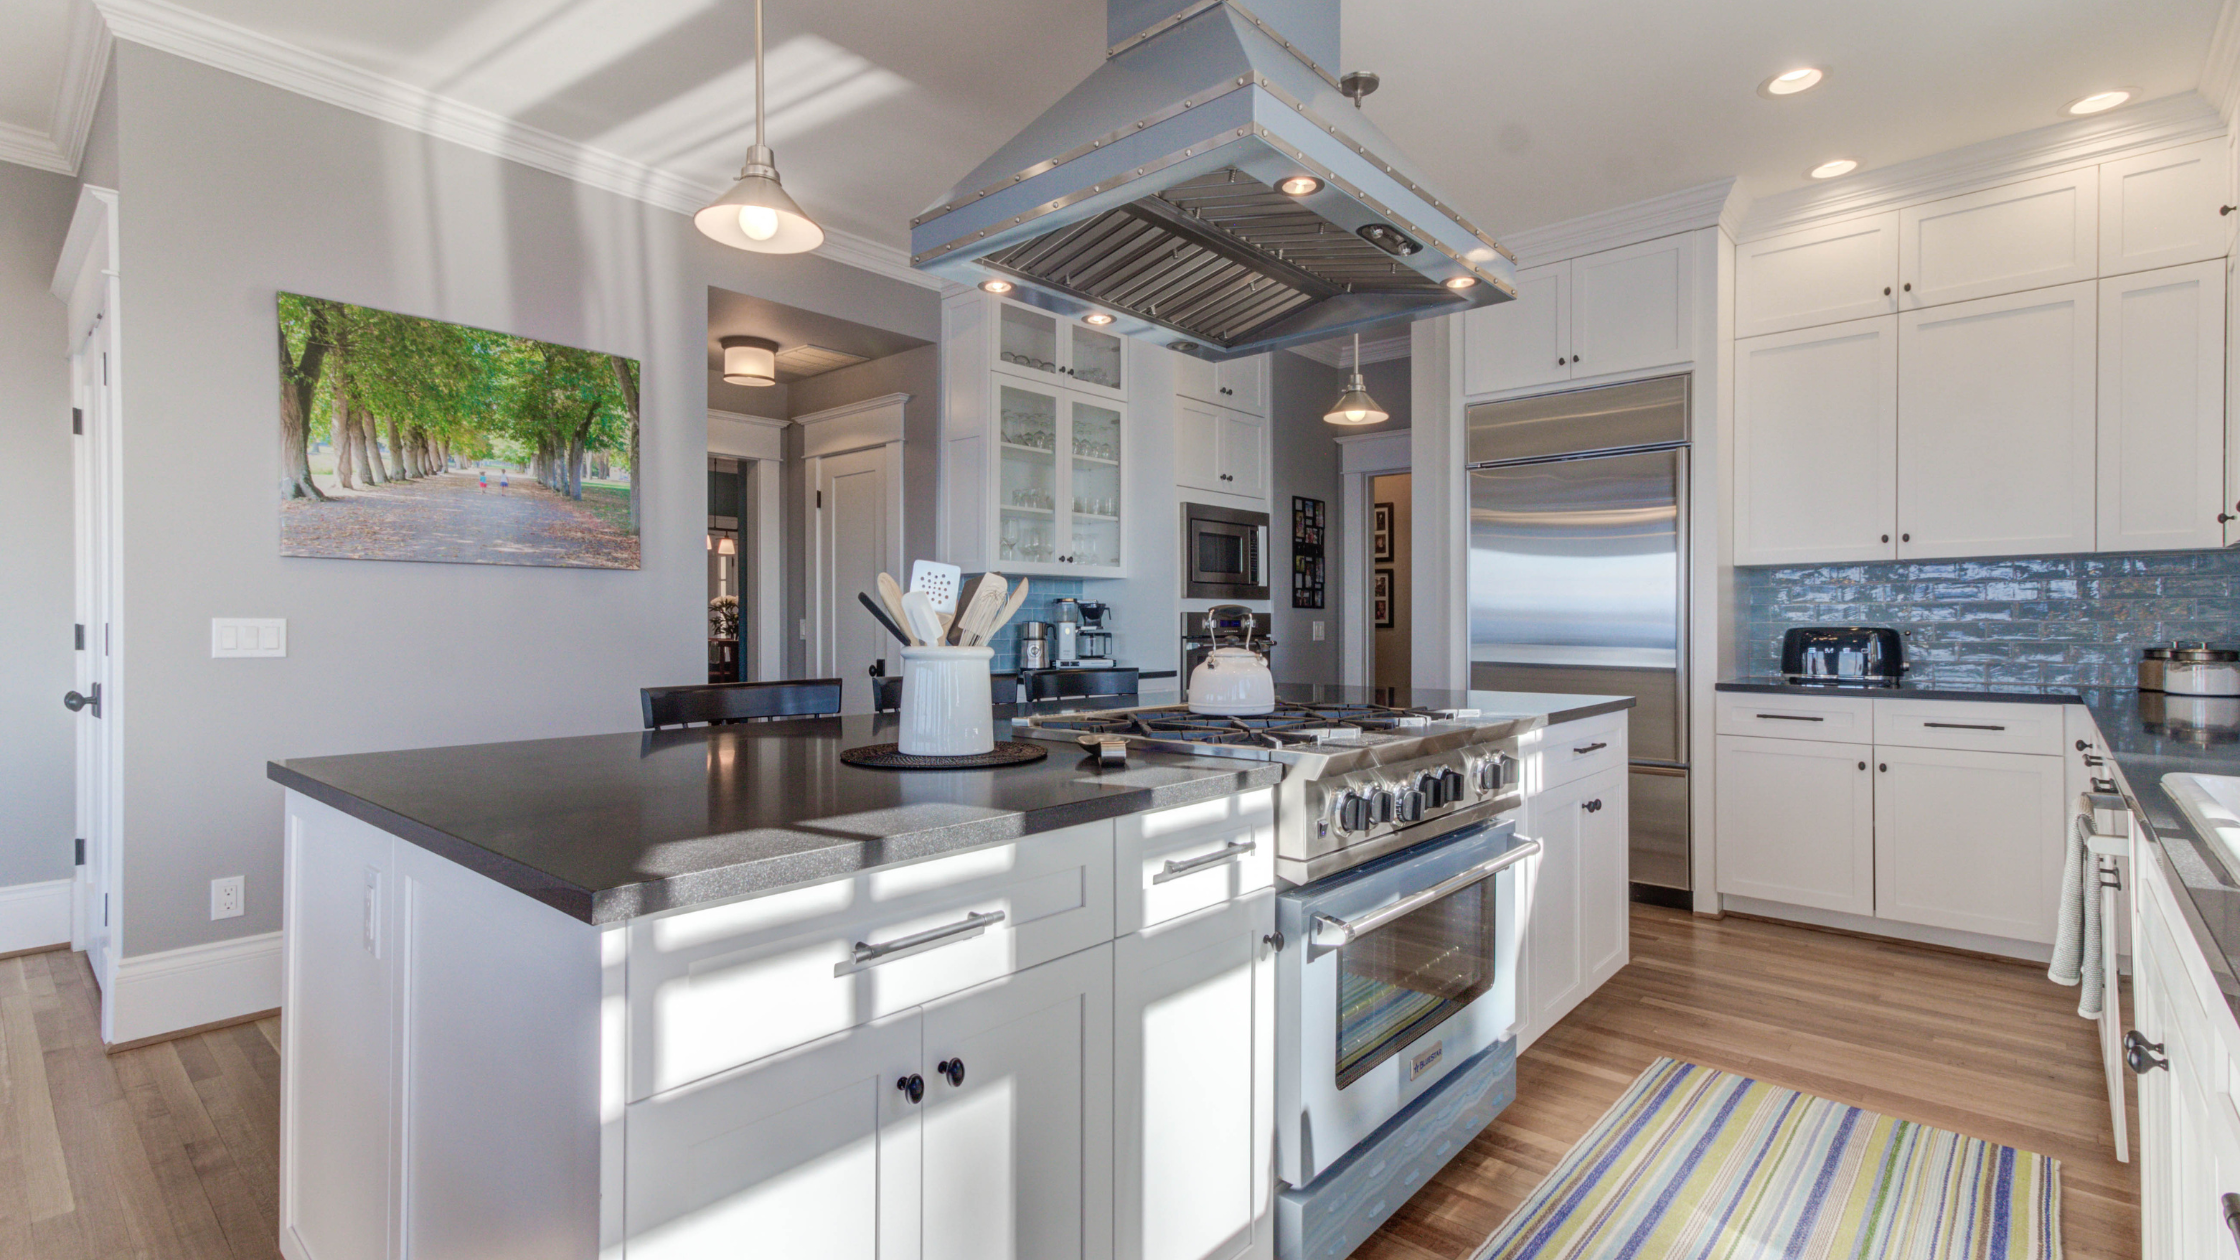 The Top 5 Elements of Beautiful Kitchen Lighting Design